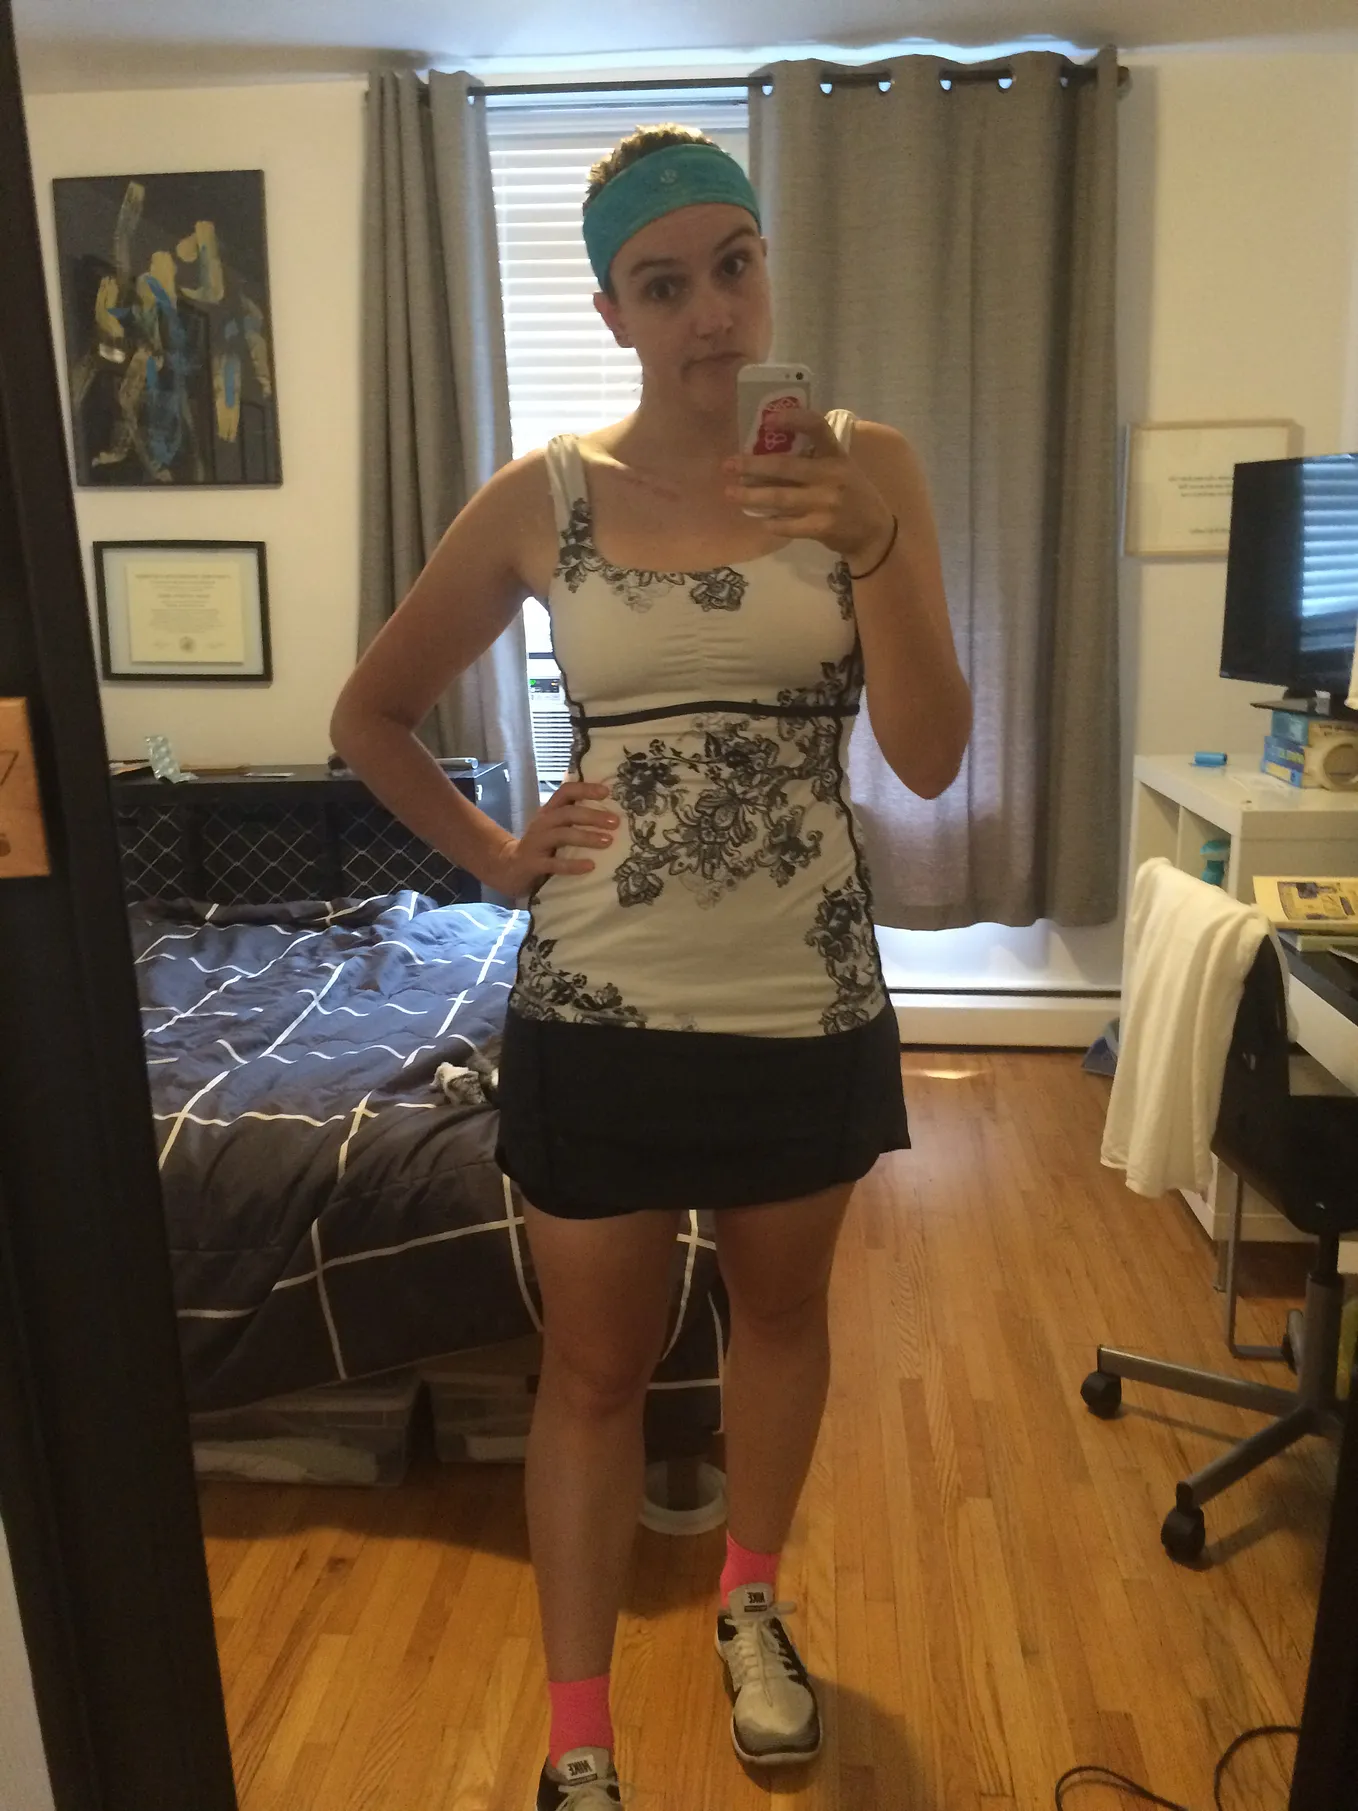 I call this look Mona, the Southern California housewife who is sleeping with her tennis instructor…